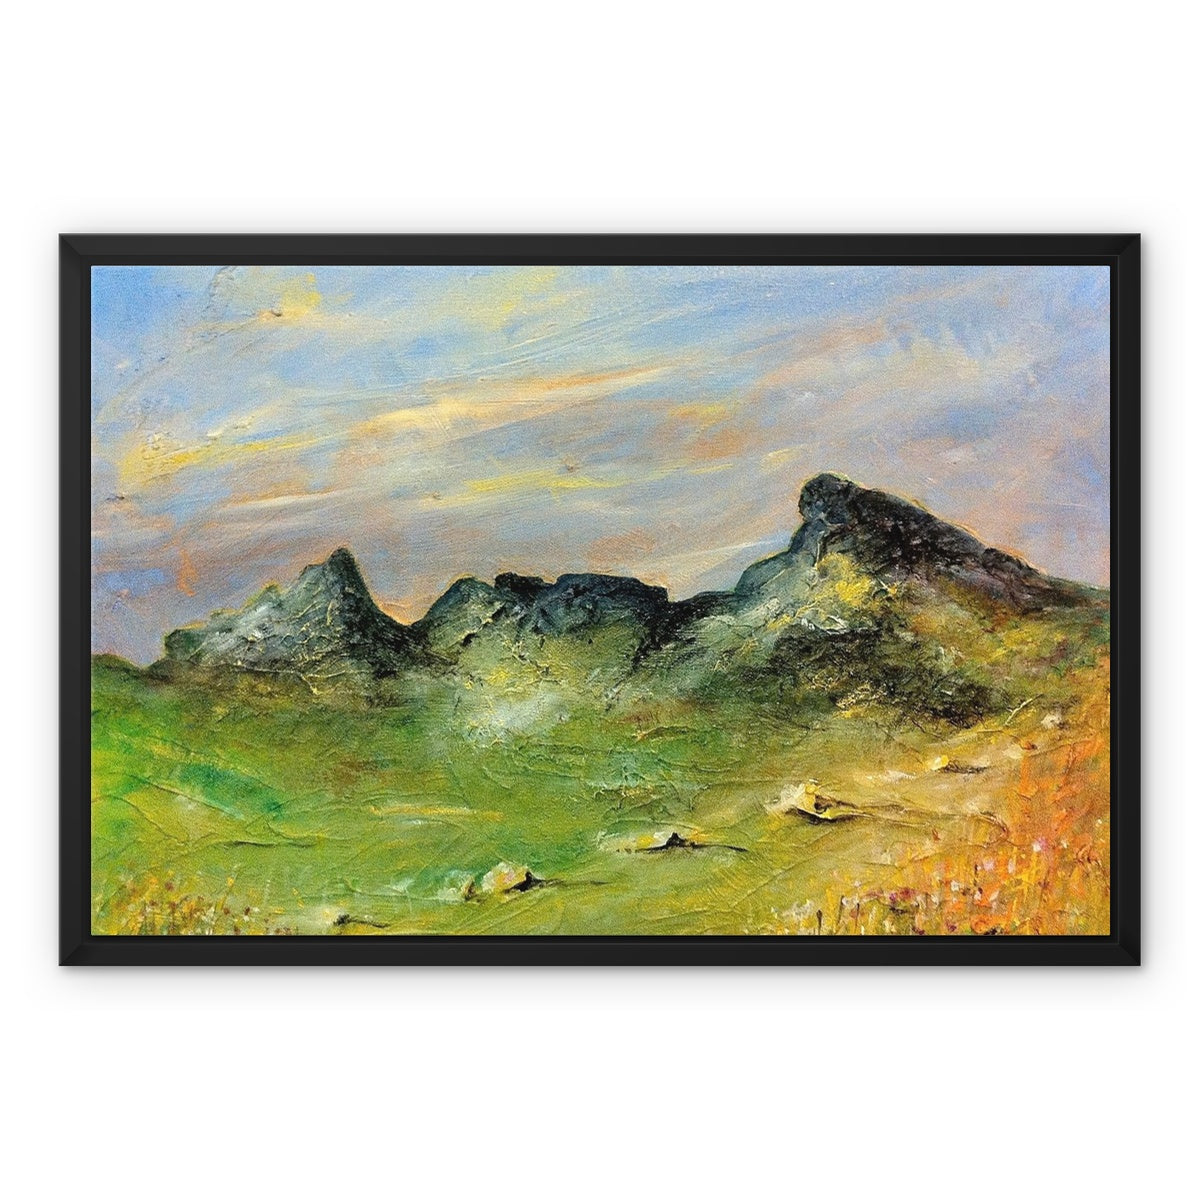 The Cobbler Painting | Framed Canvas From Scotland-Floating Framed Canvas Prints-Scottish Lochs & Mountains Art Gallery-24"x18"-Black Frame-Paintings, Prints, Homeware, Art Gifts From Scotland By Scottish Artist Kevin Hunter